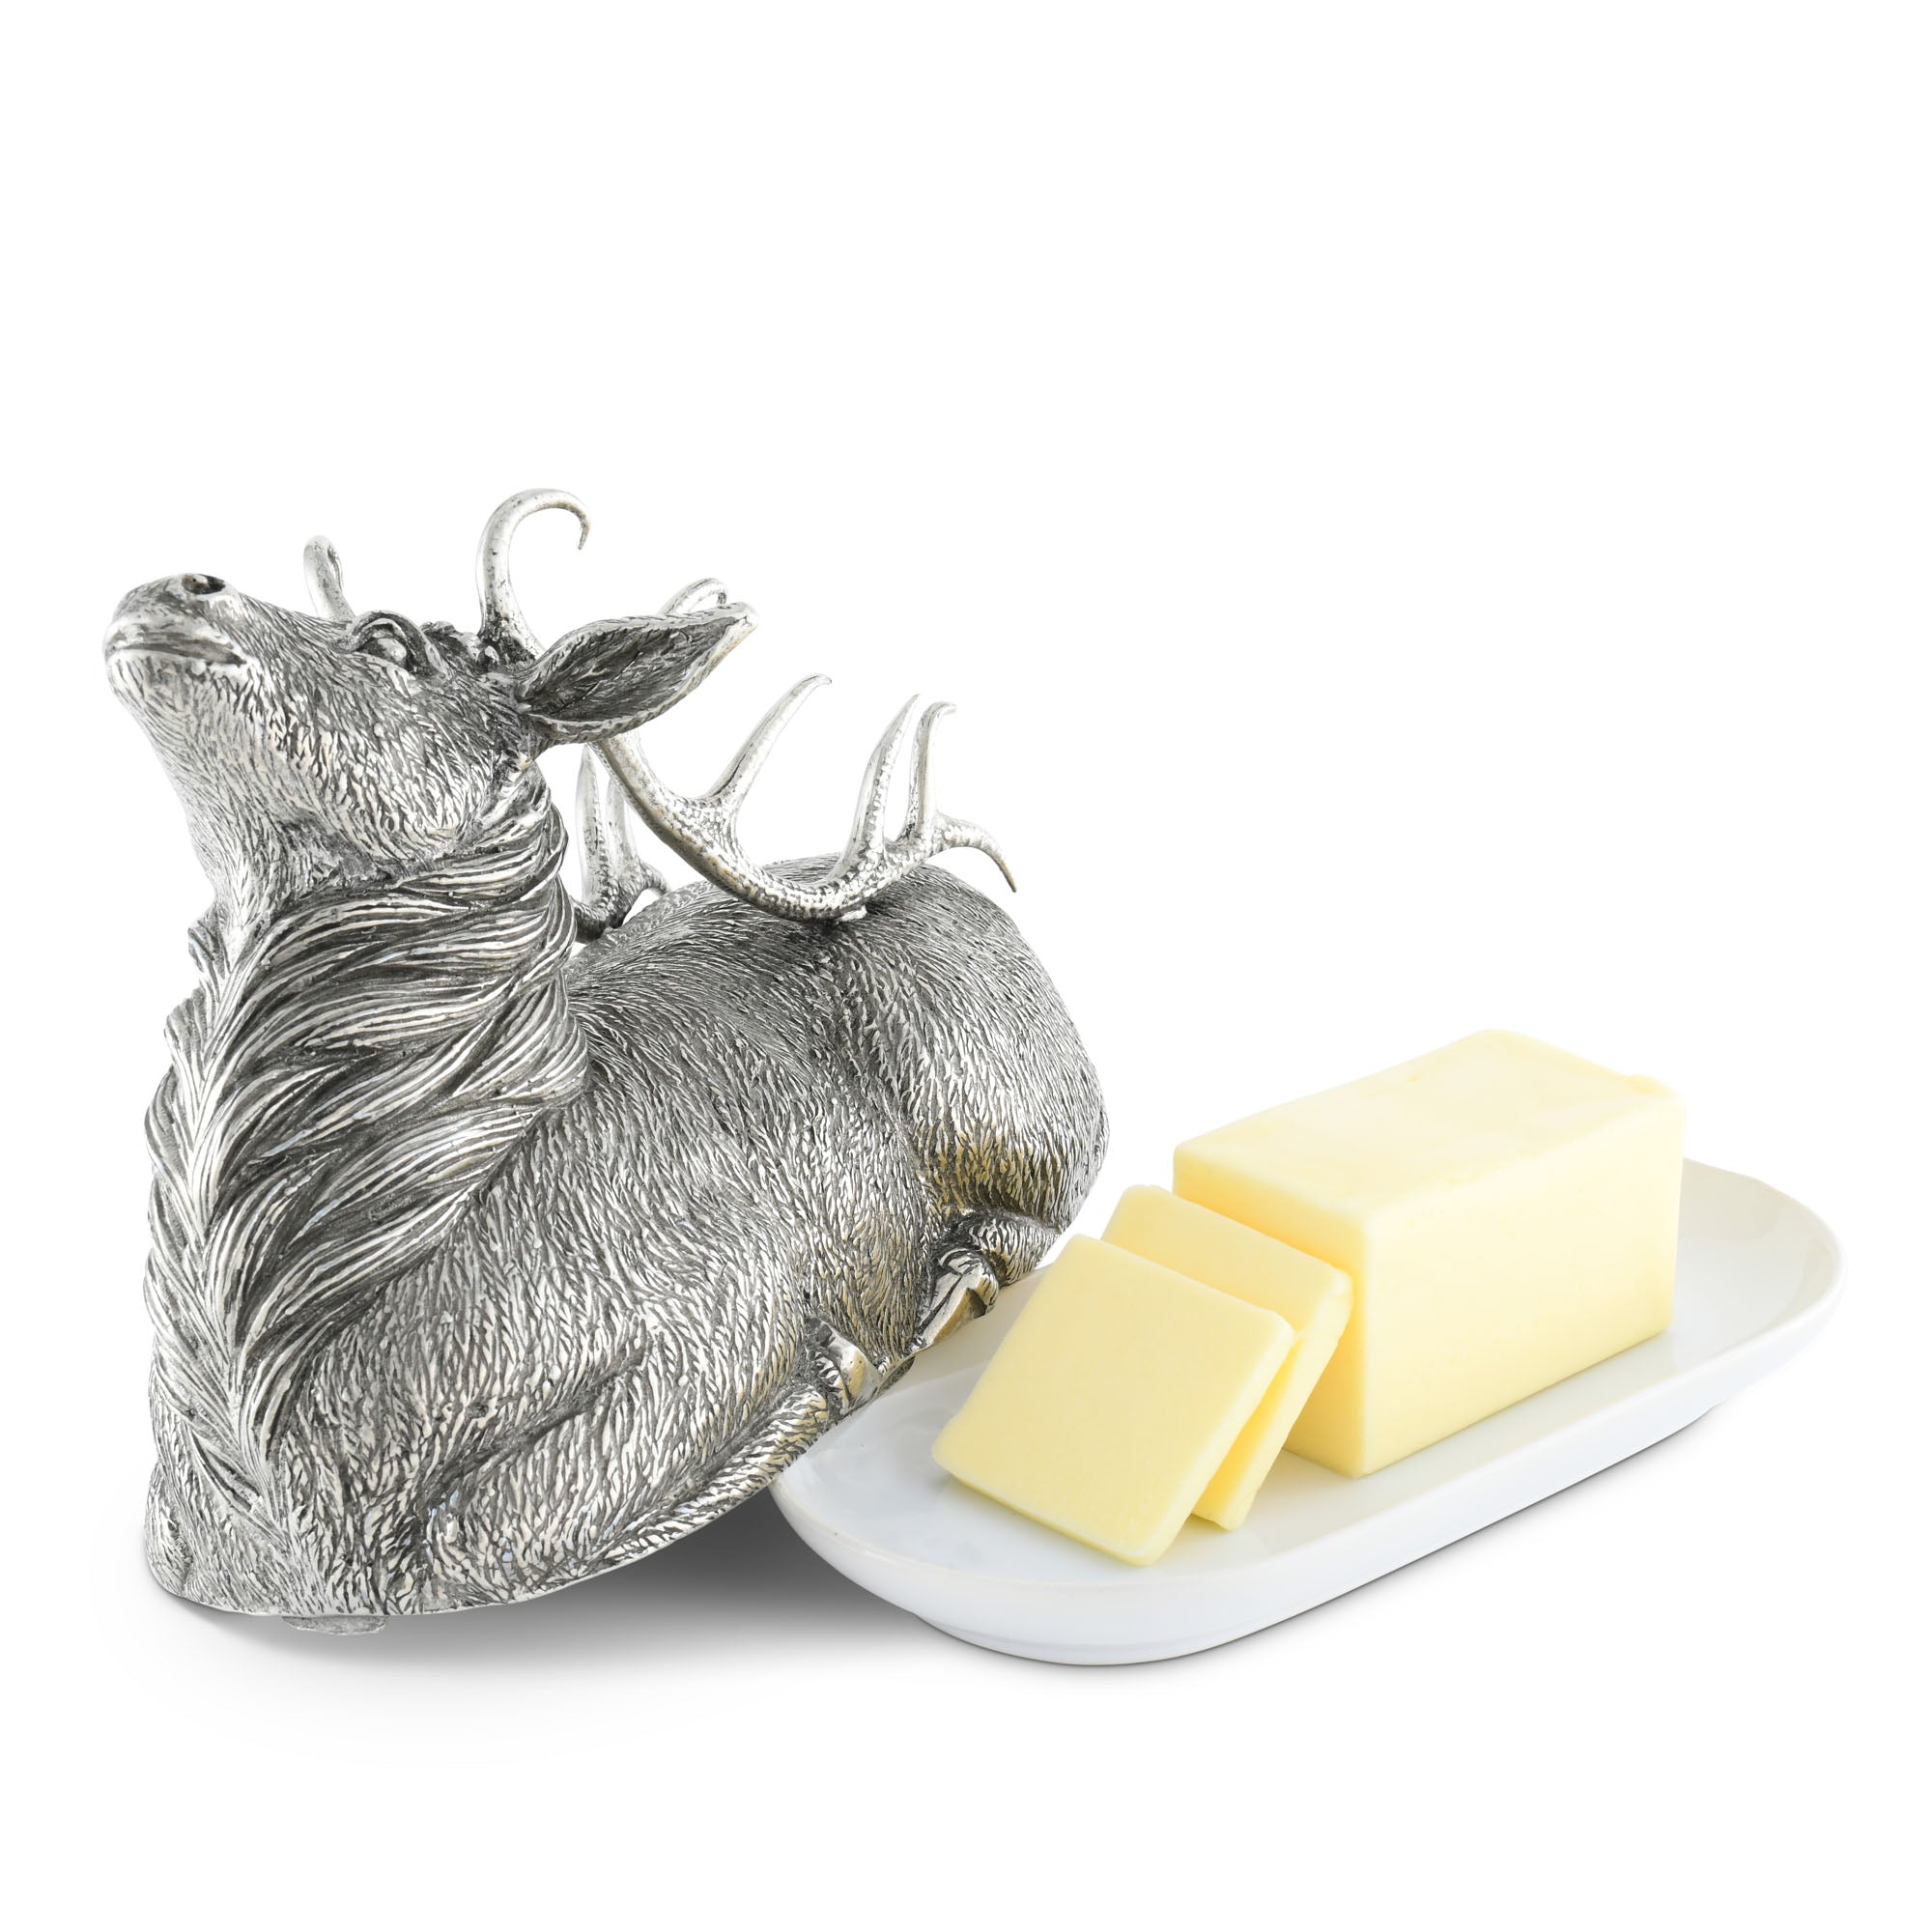 Vagabond House Pewter Stag Butter Dish Product Image